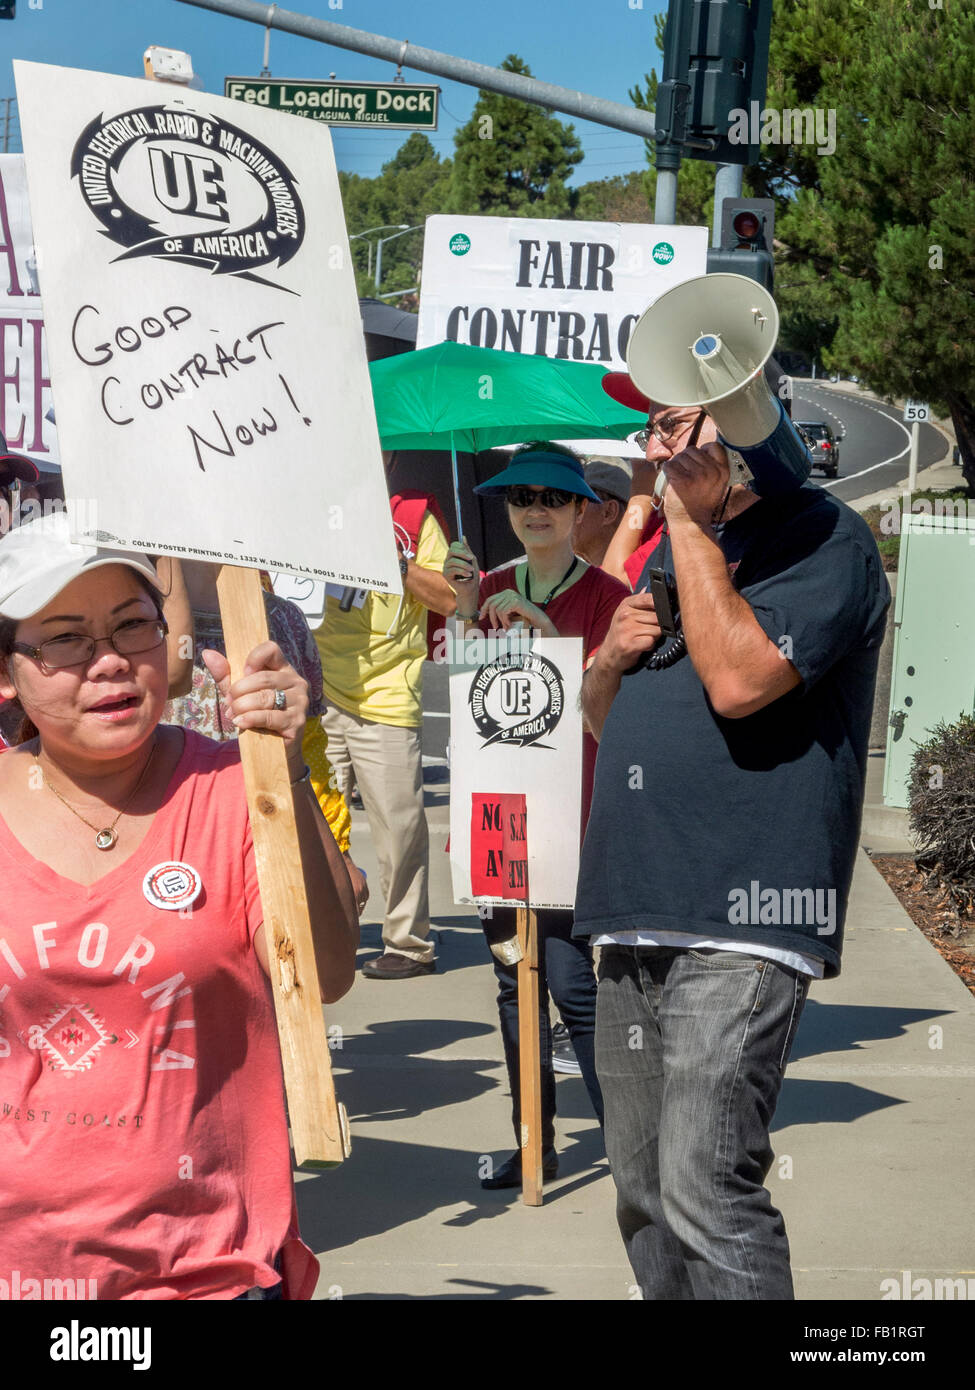 Multiracial striking electrical union workers picket a US Government building in Laguna Niguel, CA, protesting lack of scheduled salary increases. Note federal loading dock sign in background and organizer will bull horn. Stock Photo